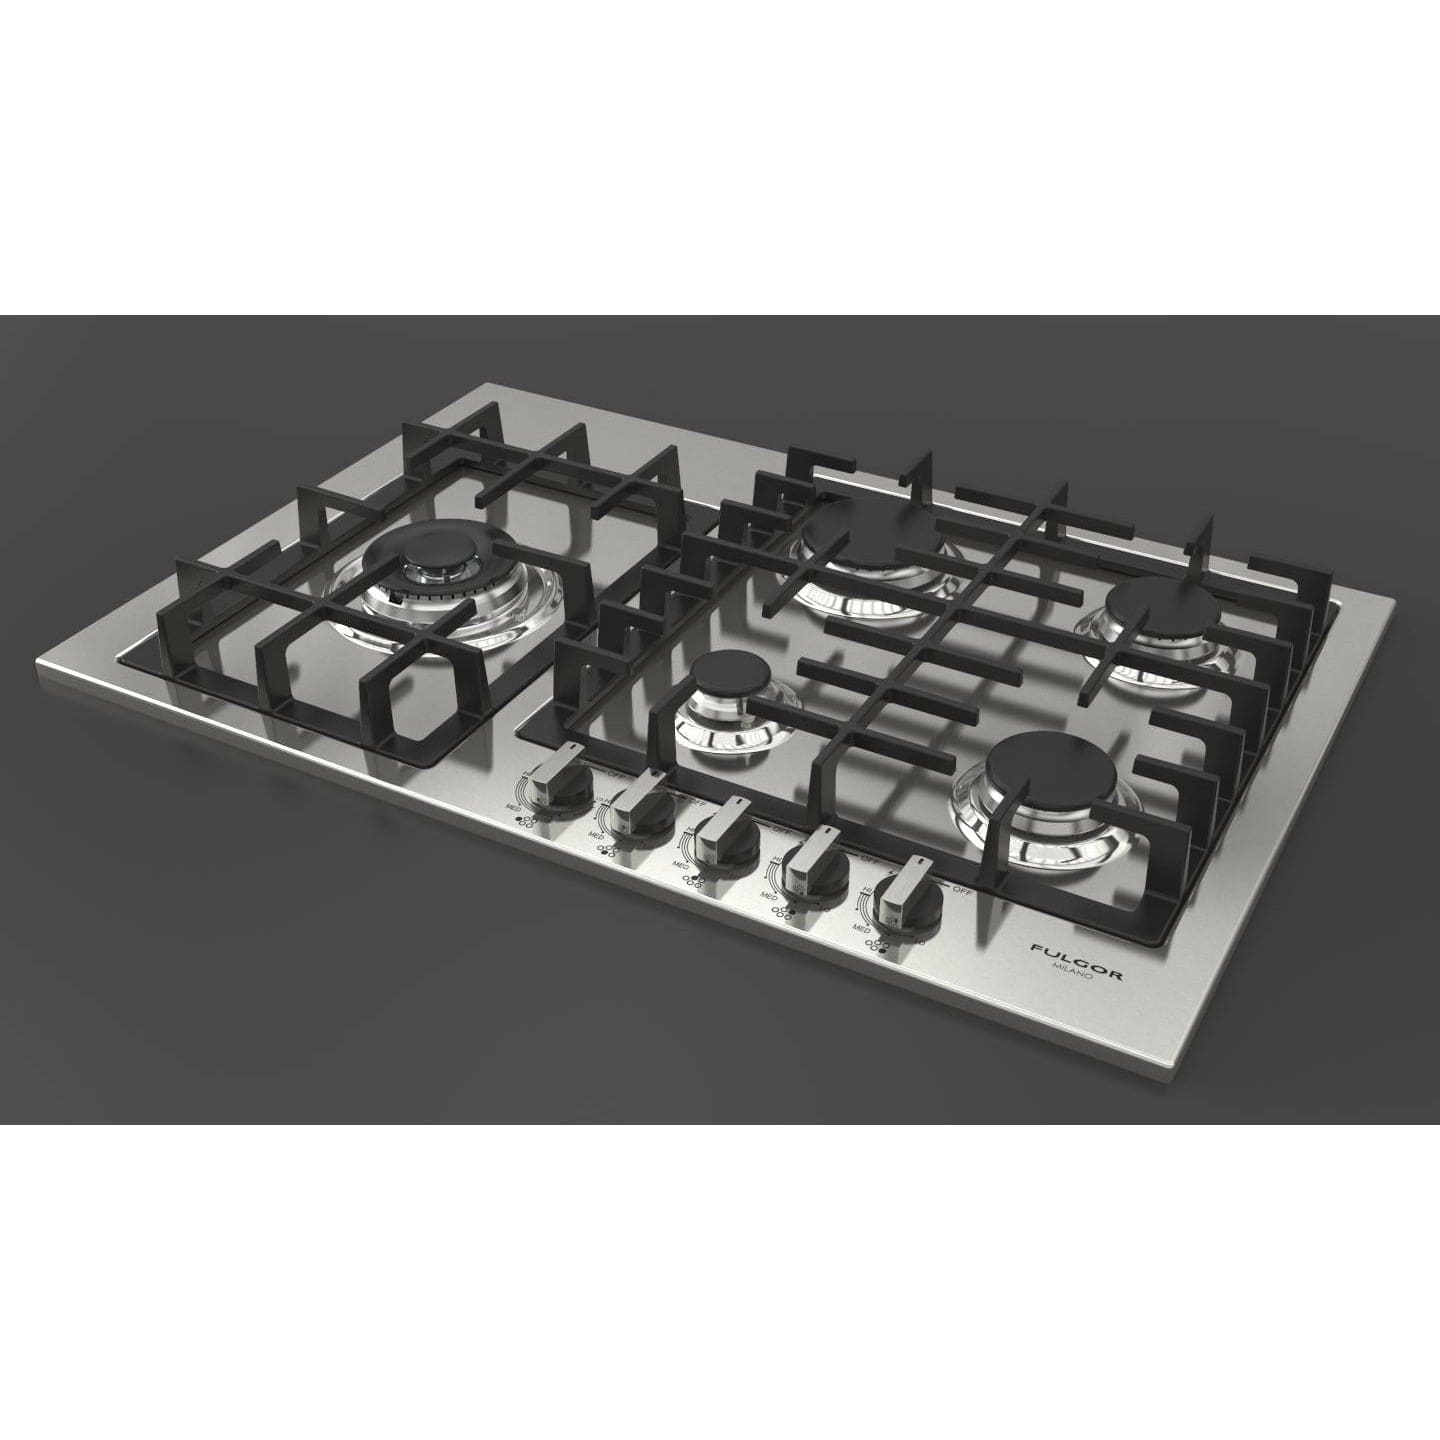 Fulgor Milano 30" Gas Cooktop with 5 European Sealed Burners - F4GK30S1 Cooktops F4GK30S1 Luxury Appliances Direct